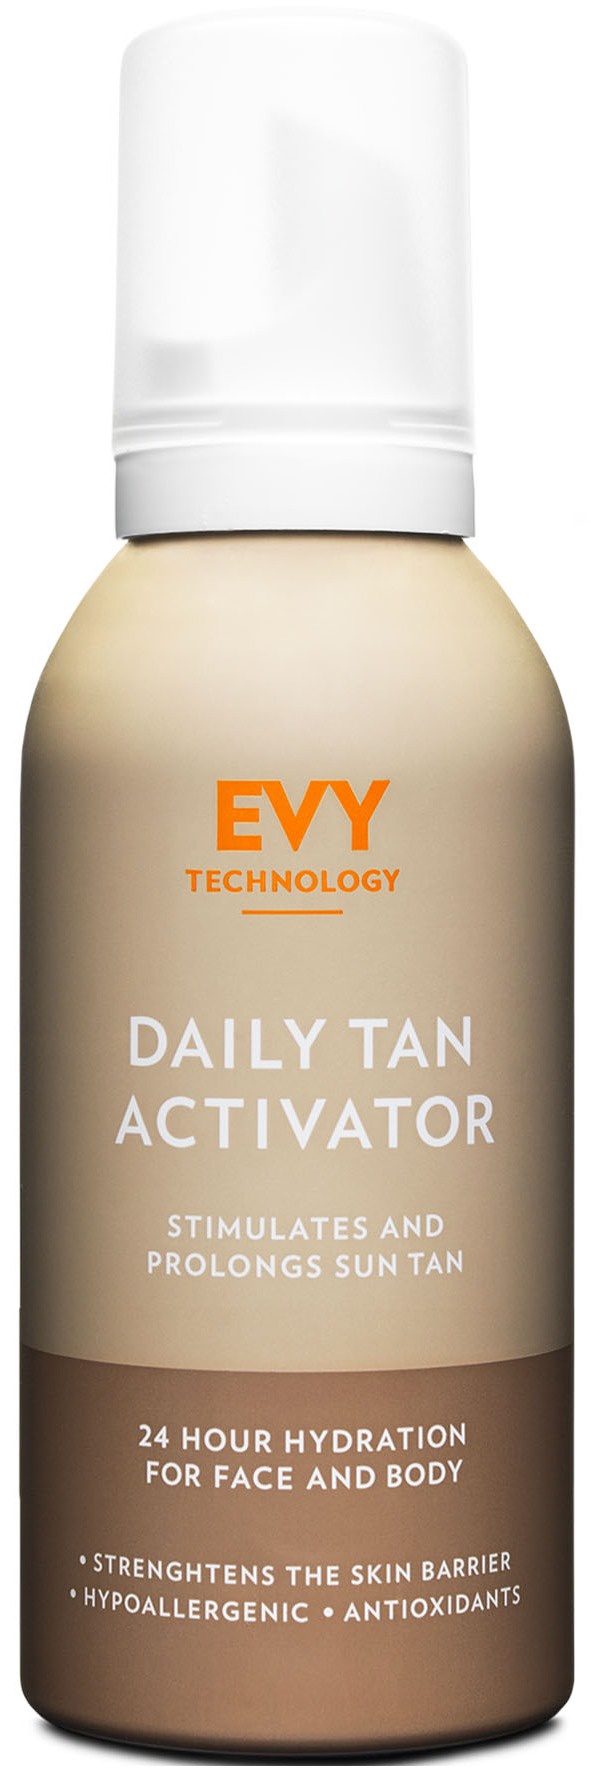 Evy Daily Tan Activator